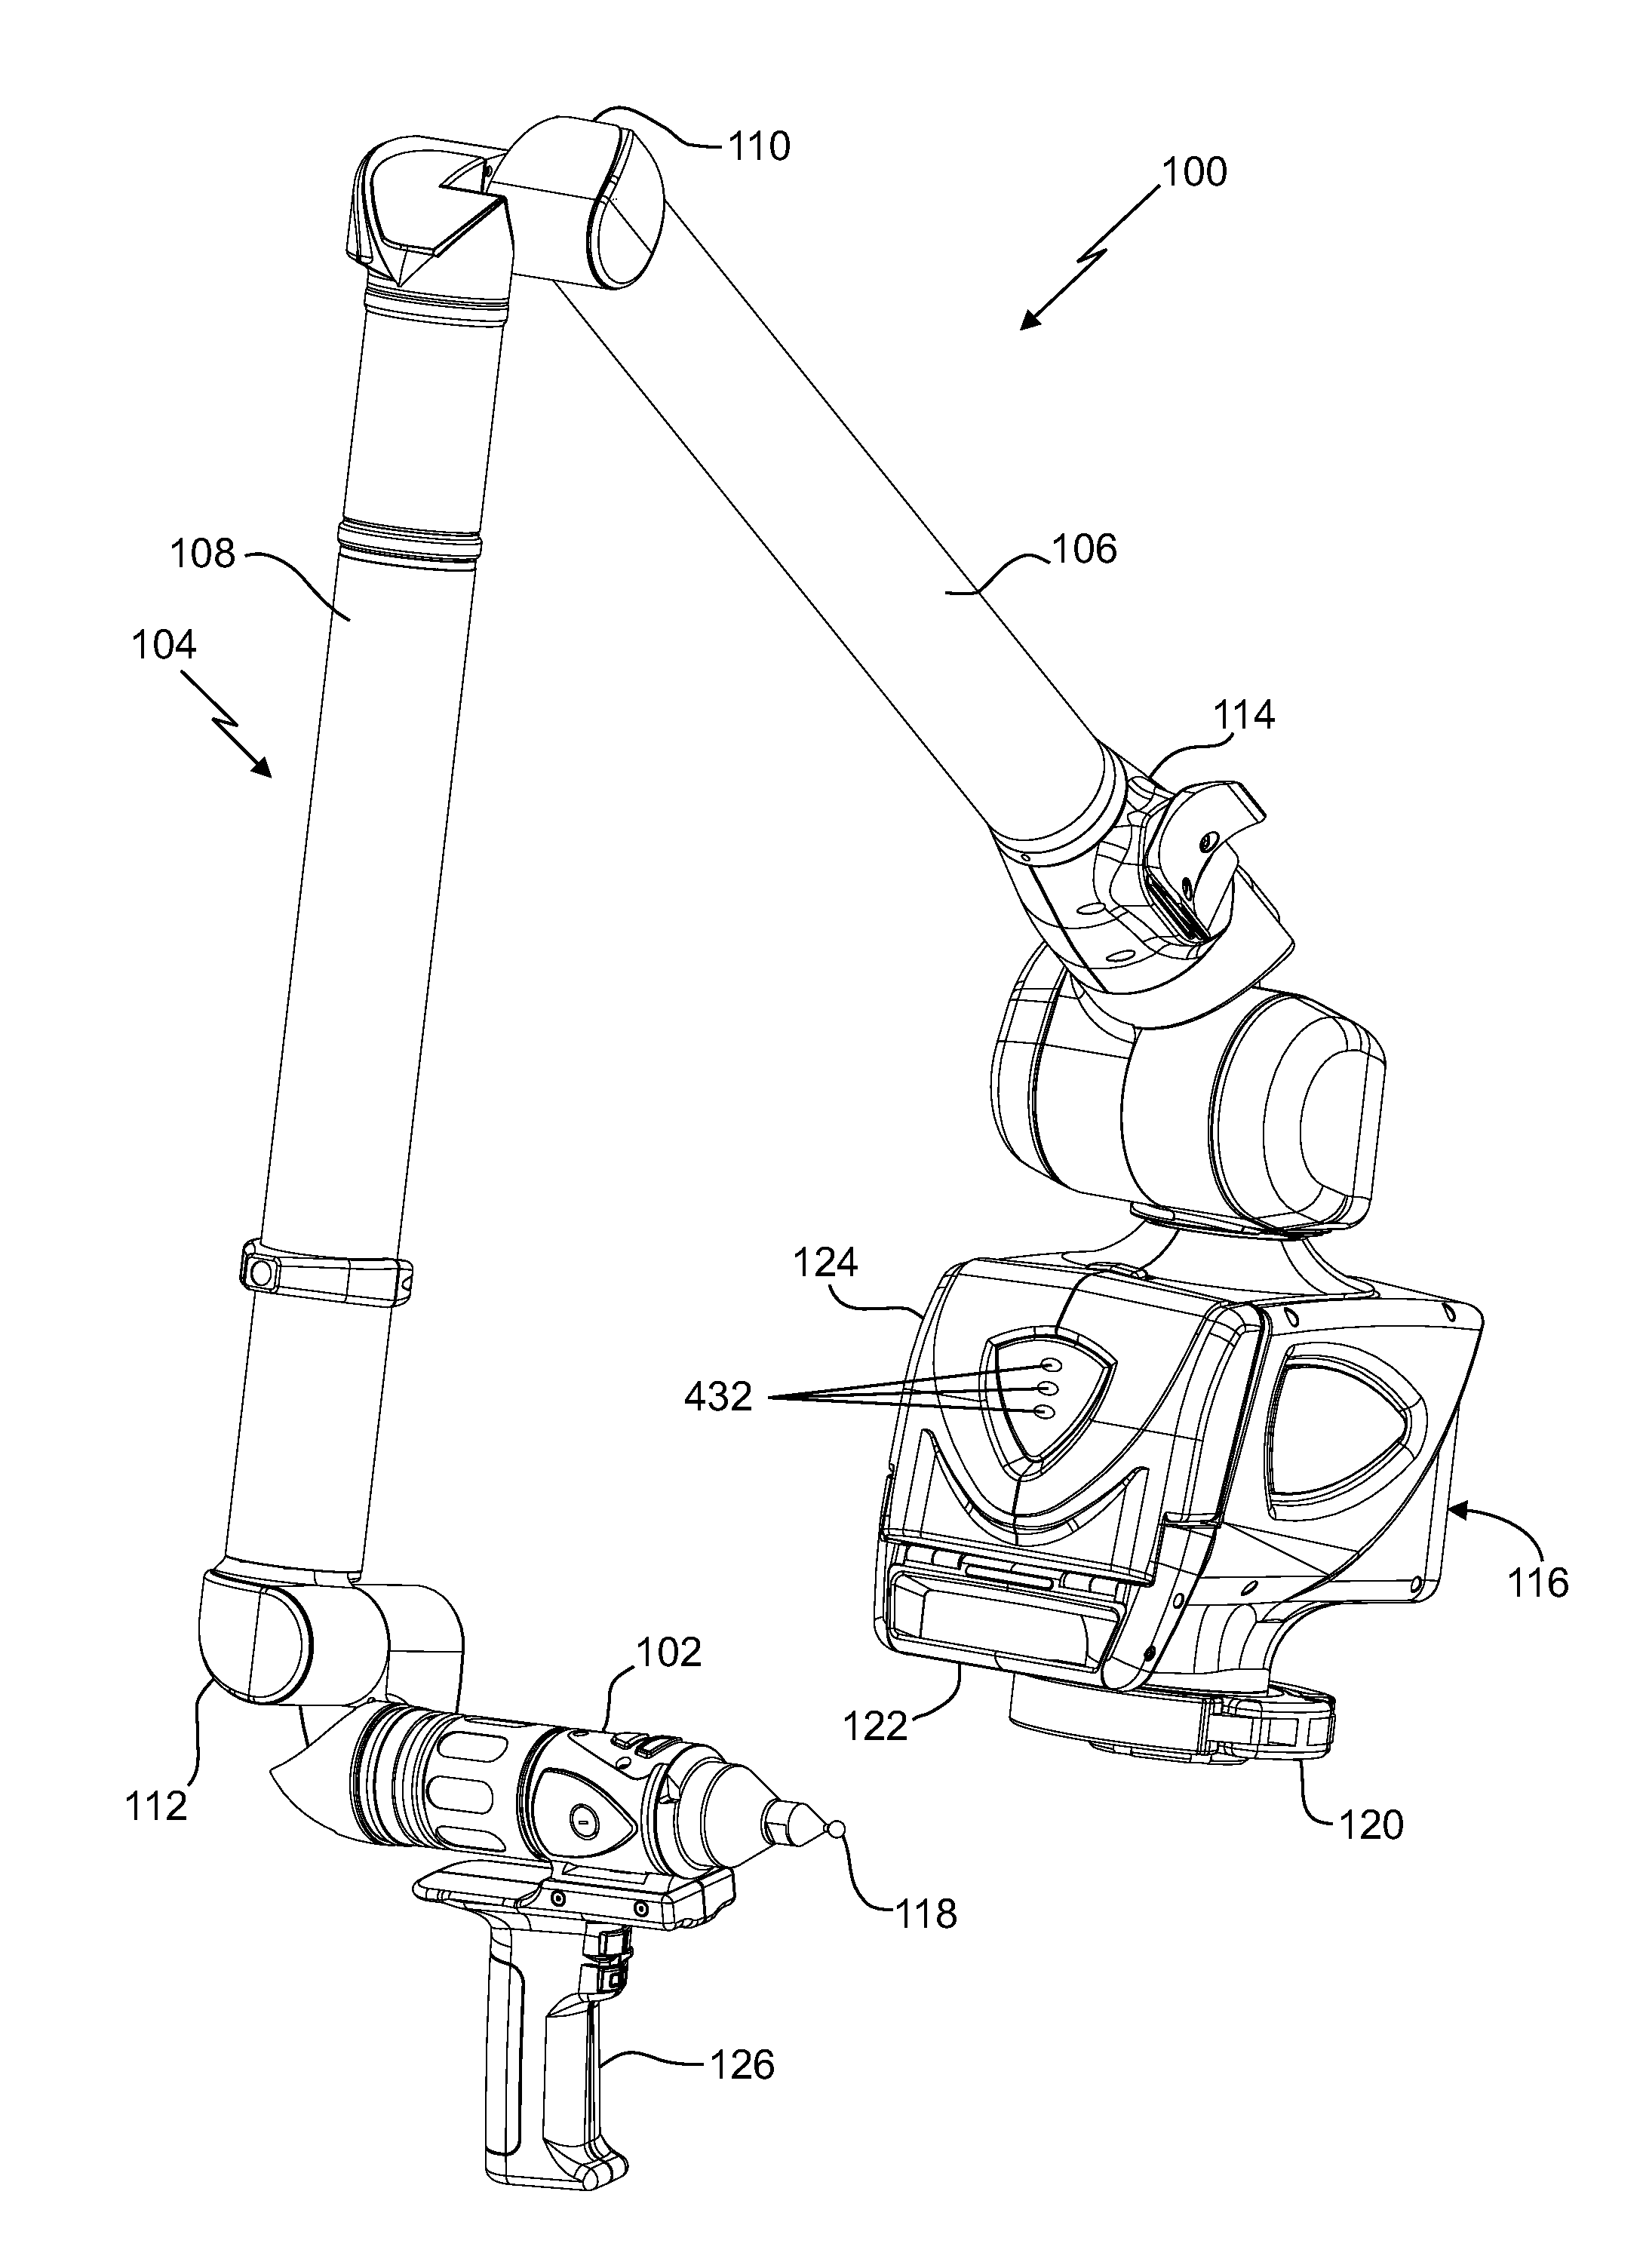 Measurement machine utilizing a barcode to identify an inspection plan for an object